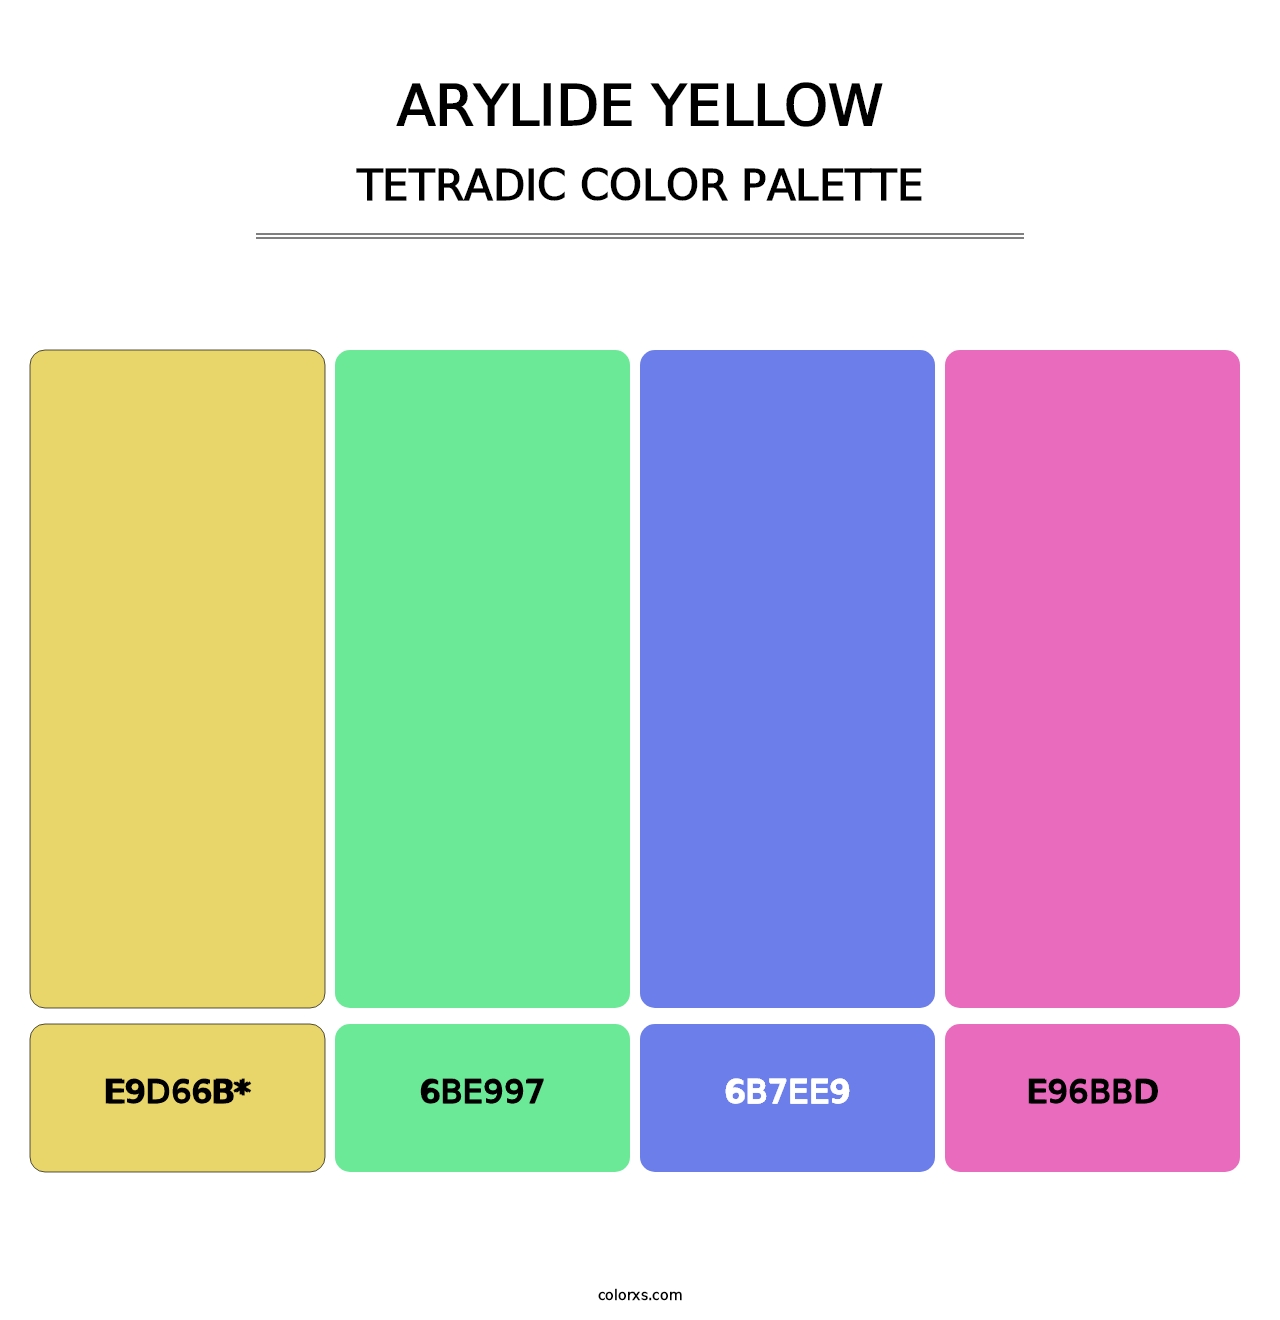 Arylide Yellow - Tetradic Color Palette